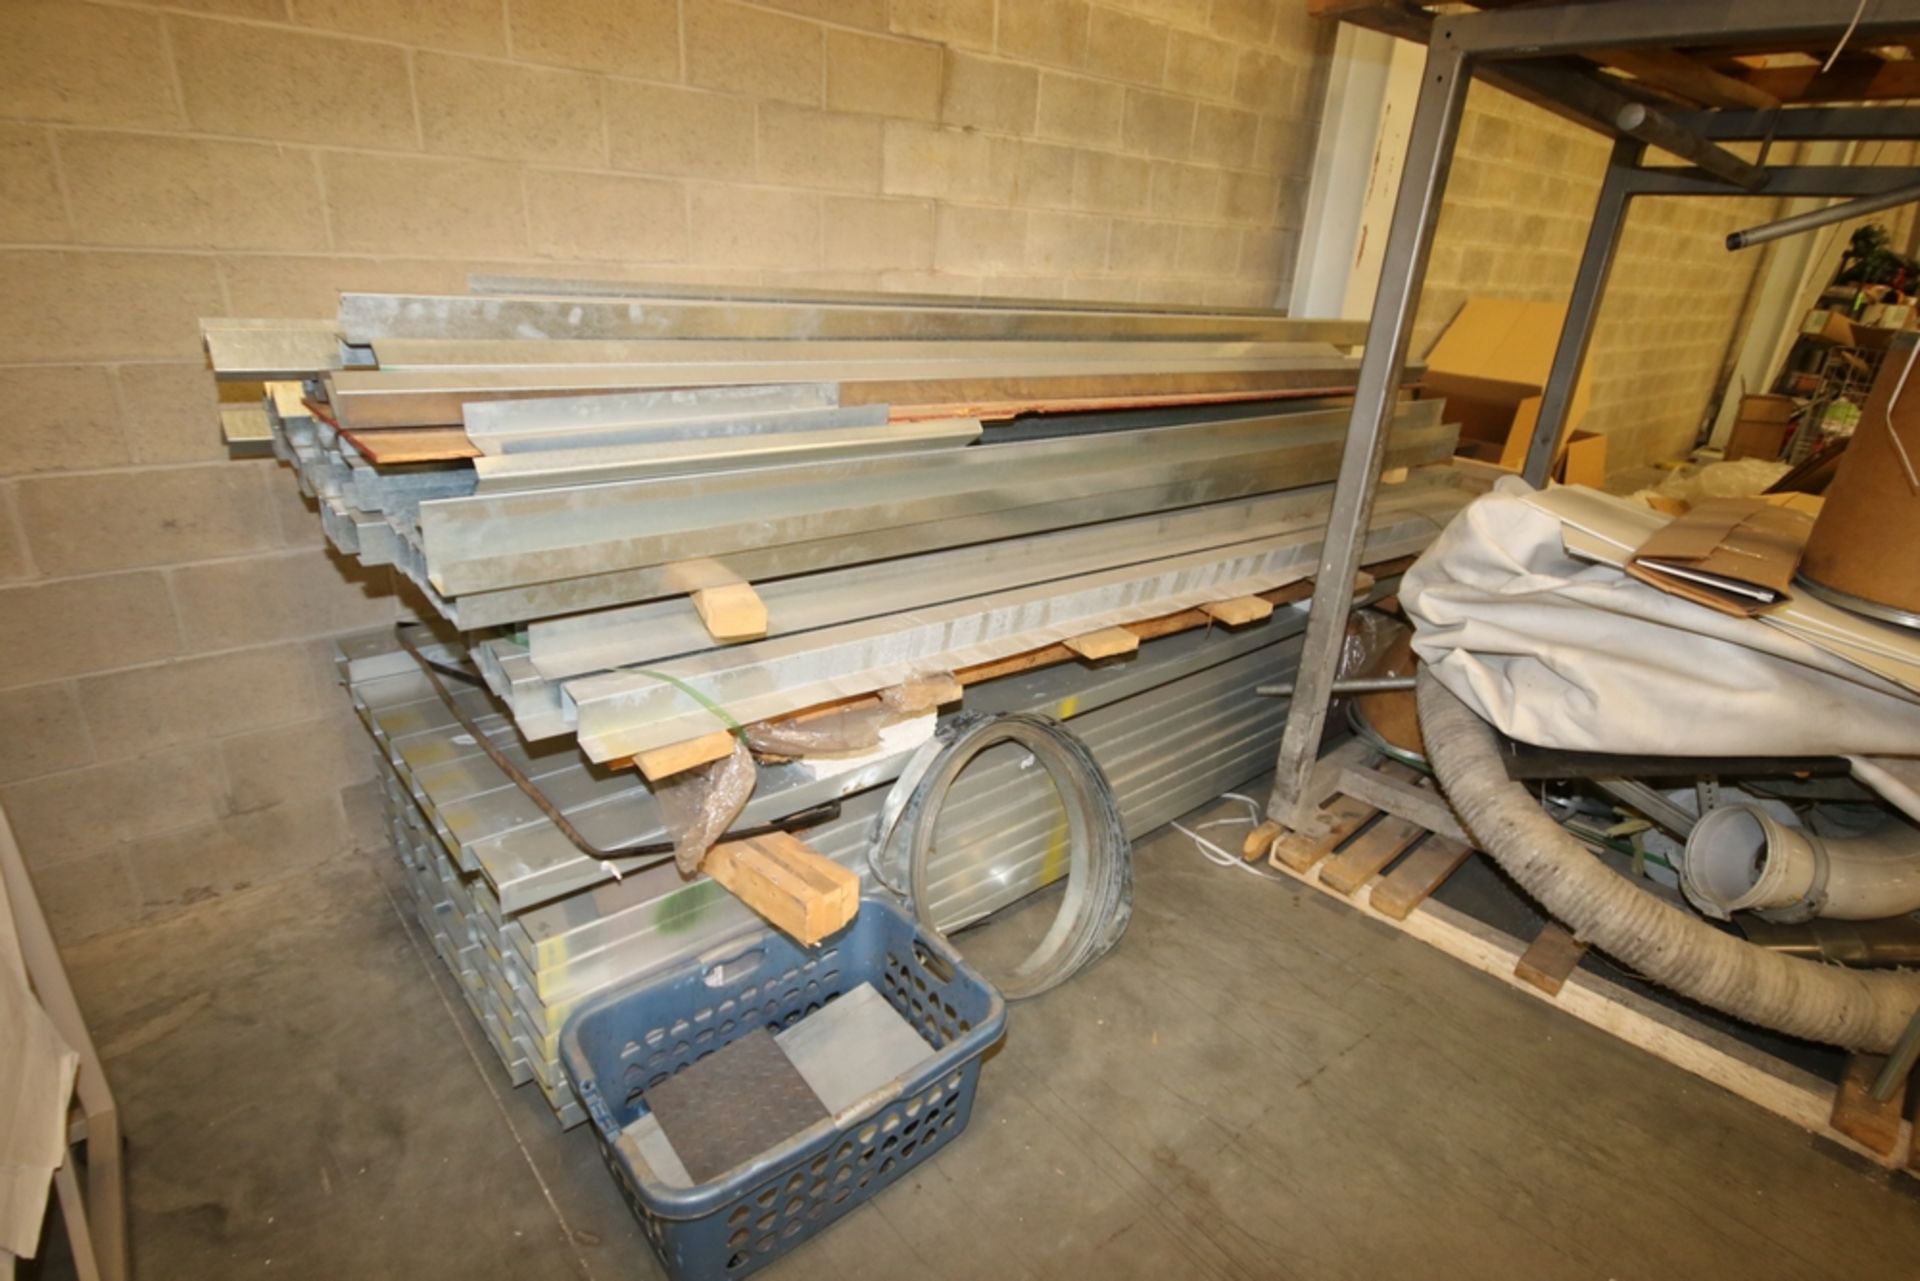 Assortment of Galvanized Studs & Track, with Galvanized Shelving Unit, with Contents